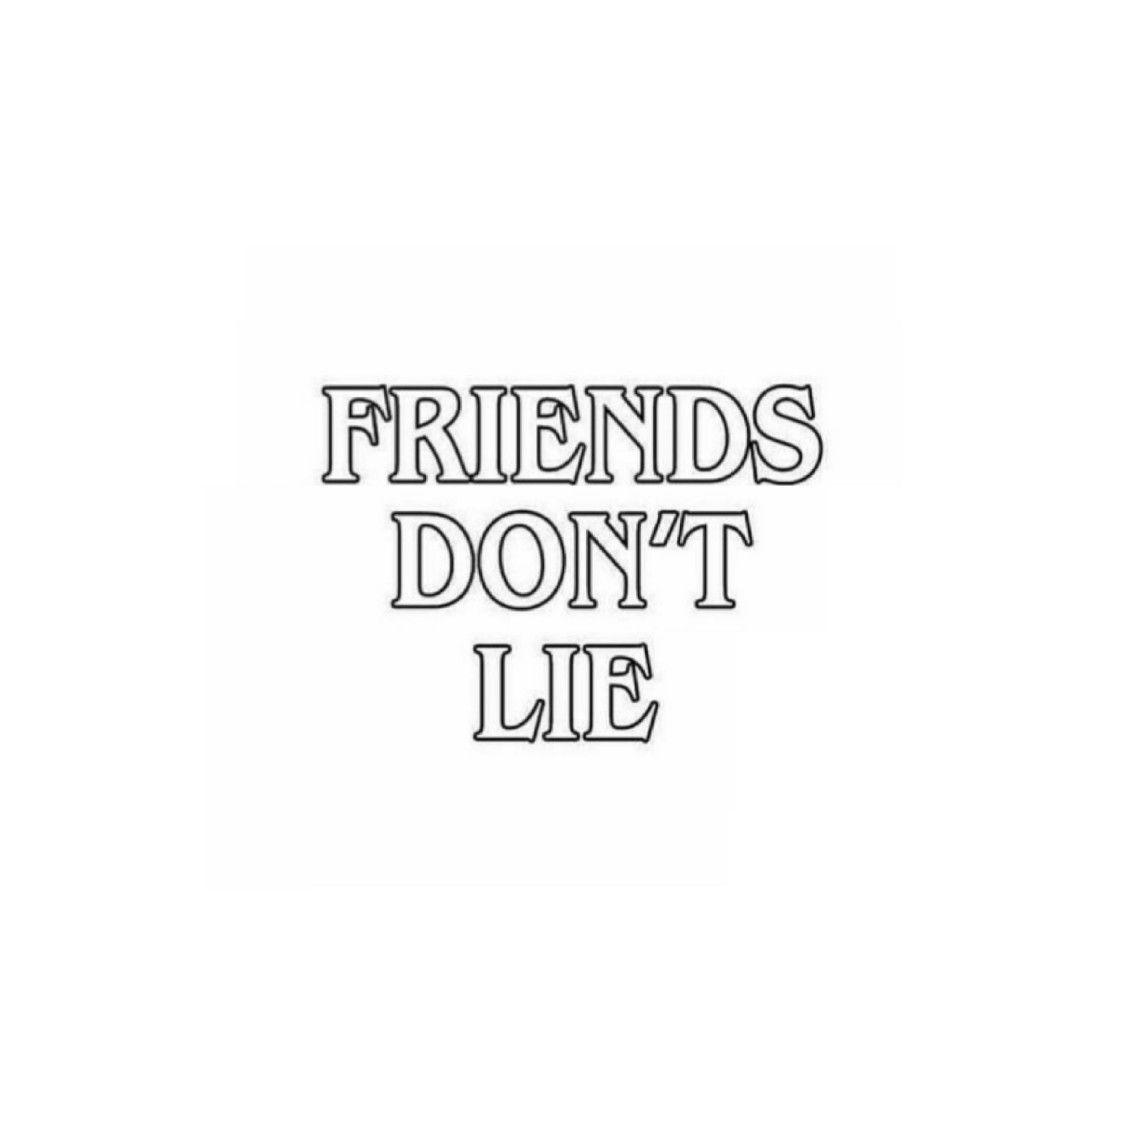 Friends Dont Lie  Stranger Things Eleven quotes wallpaper background   Stranger things quote Eleven stranger things Stranger things pins